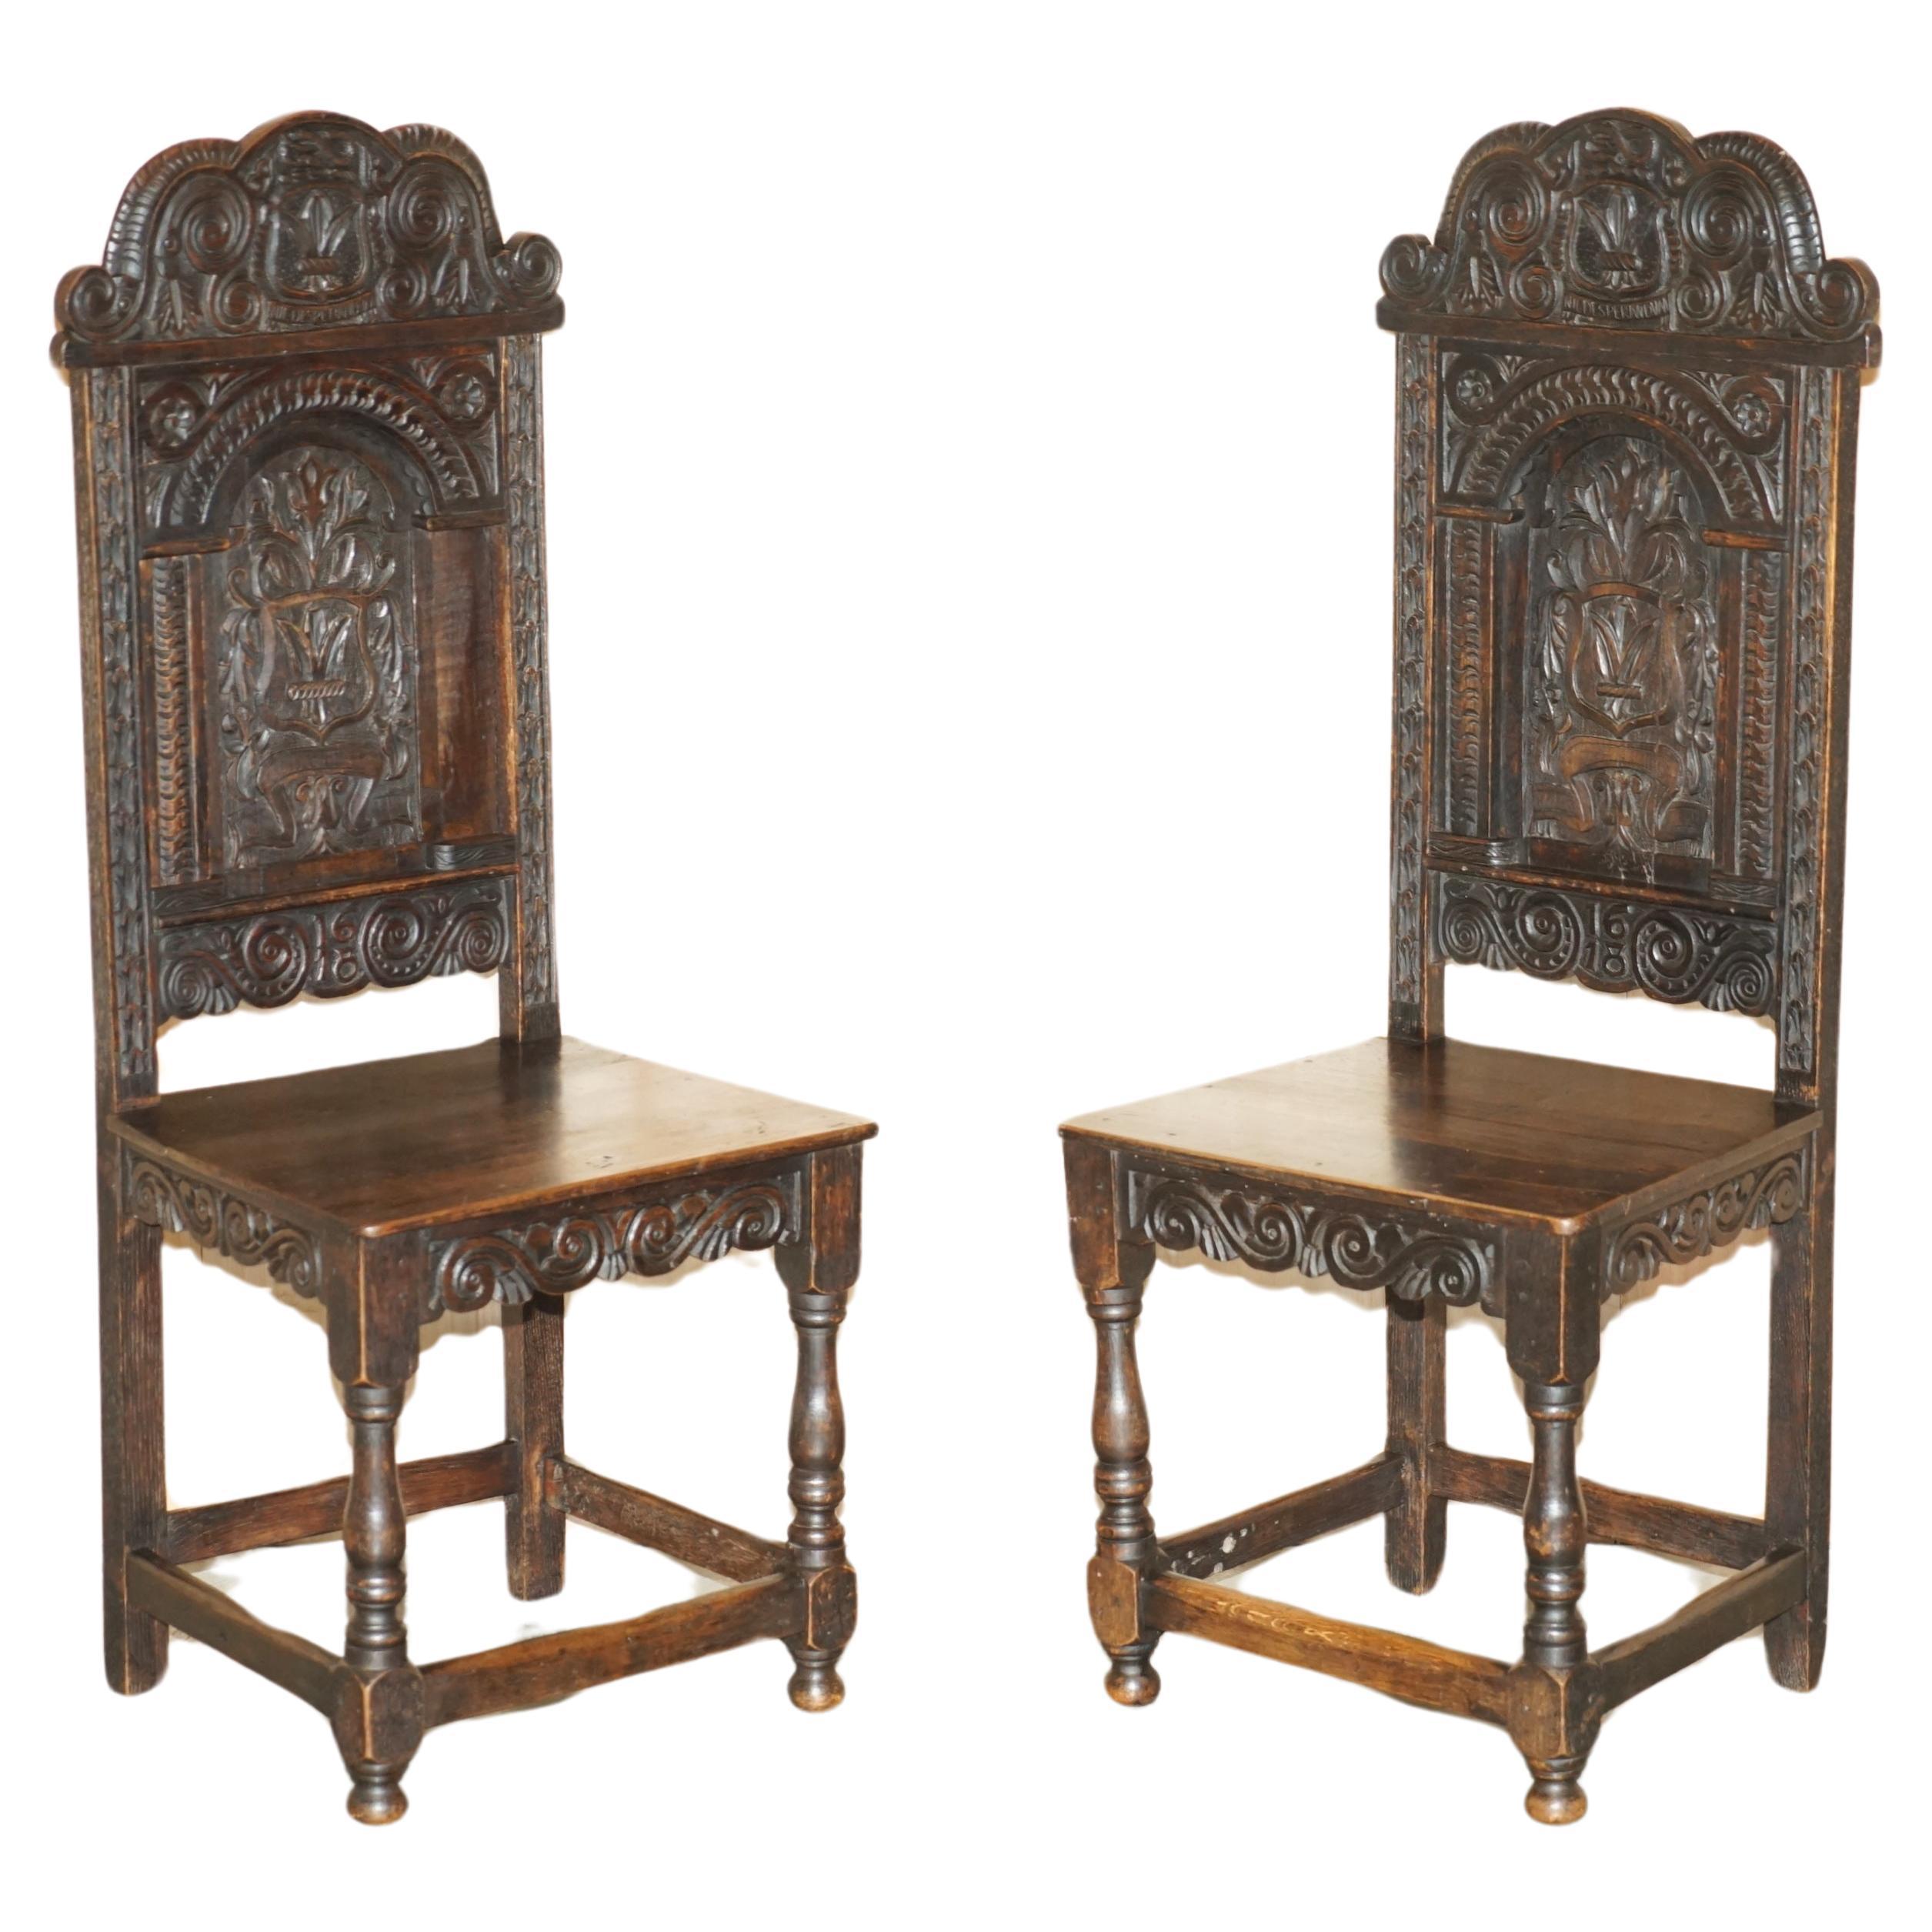 ANTIQUE PAIR OF 17TH CENTURY JACOBEAN ENGLISH OAK CHAIRS FROM THE FILM HELLBOy For Sale